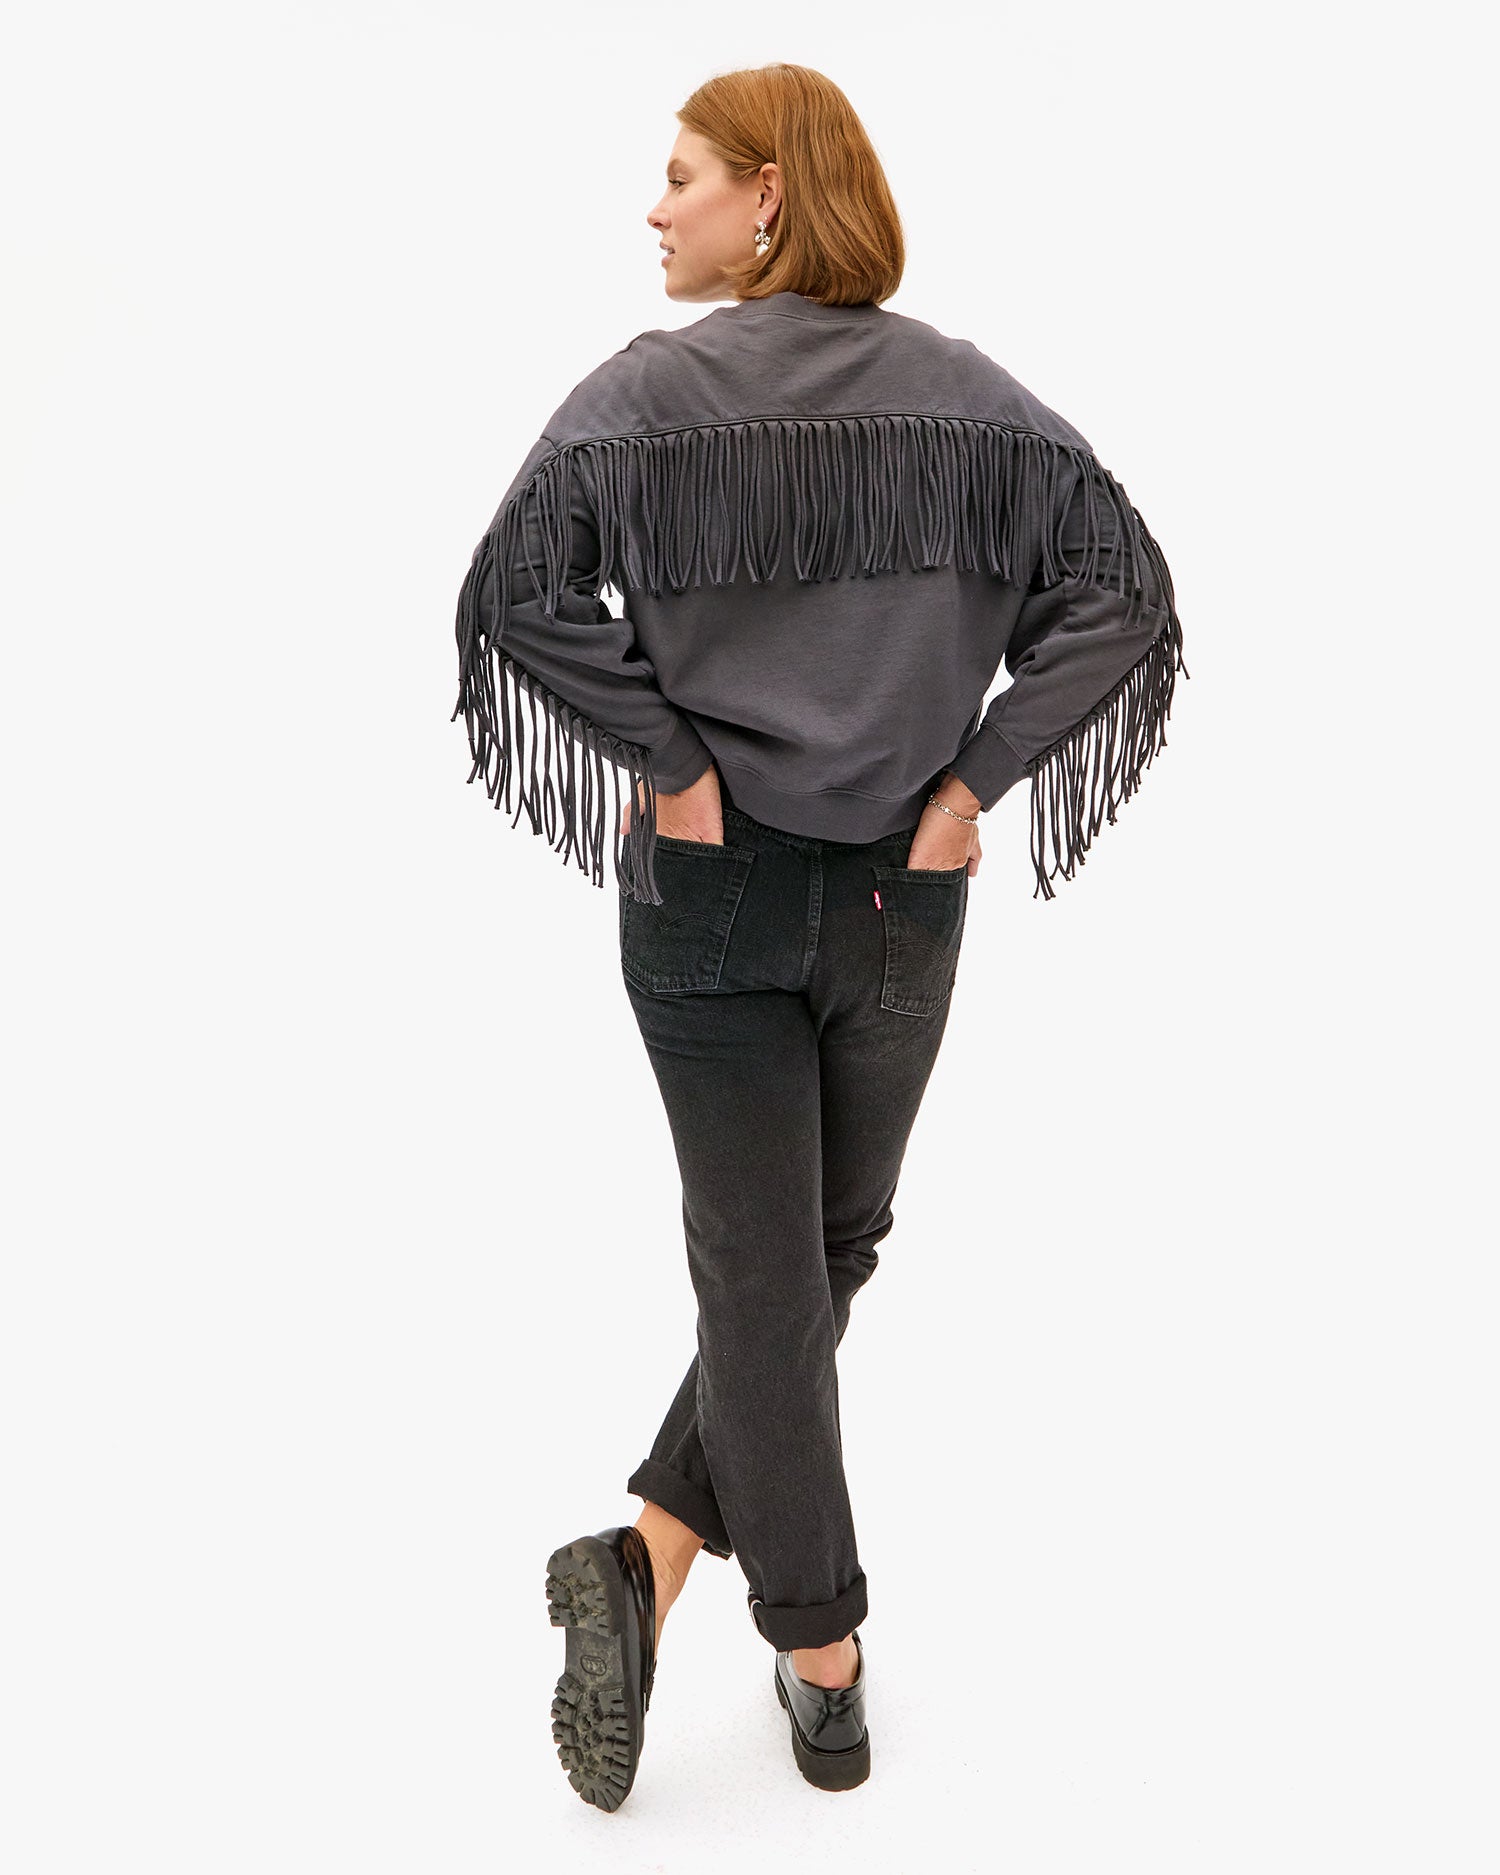 Back view of sonnie wearing the charcoal le drop fringe with black jeans 